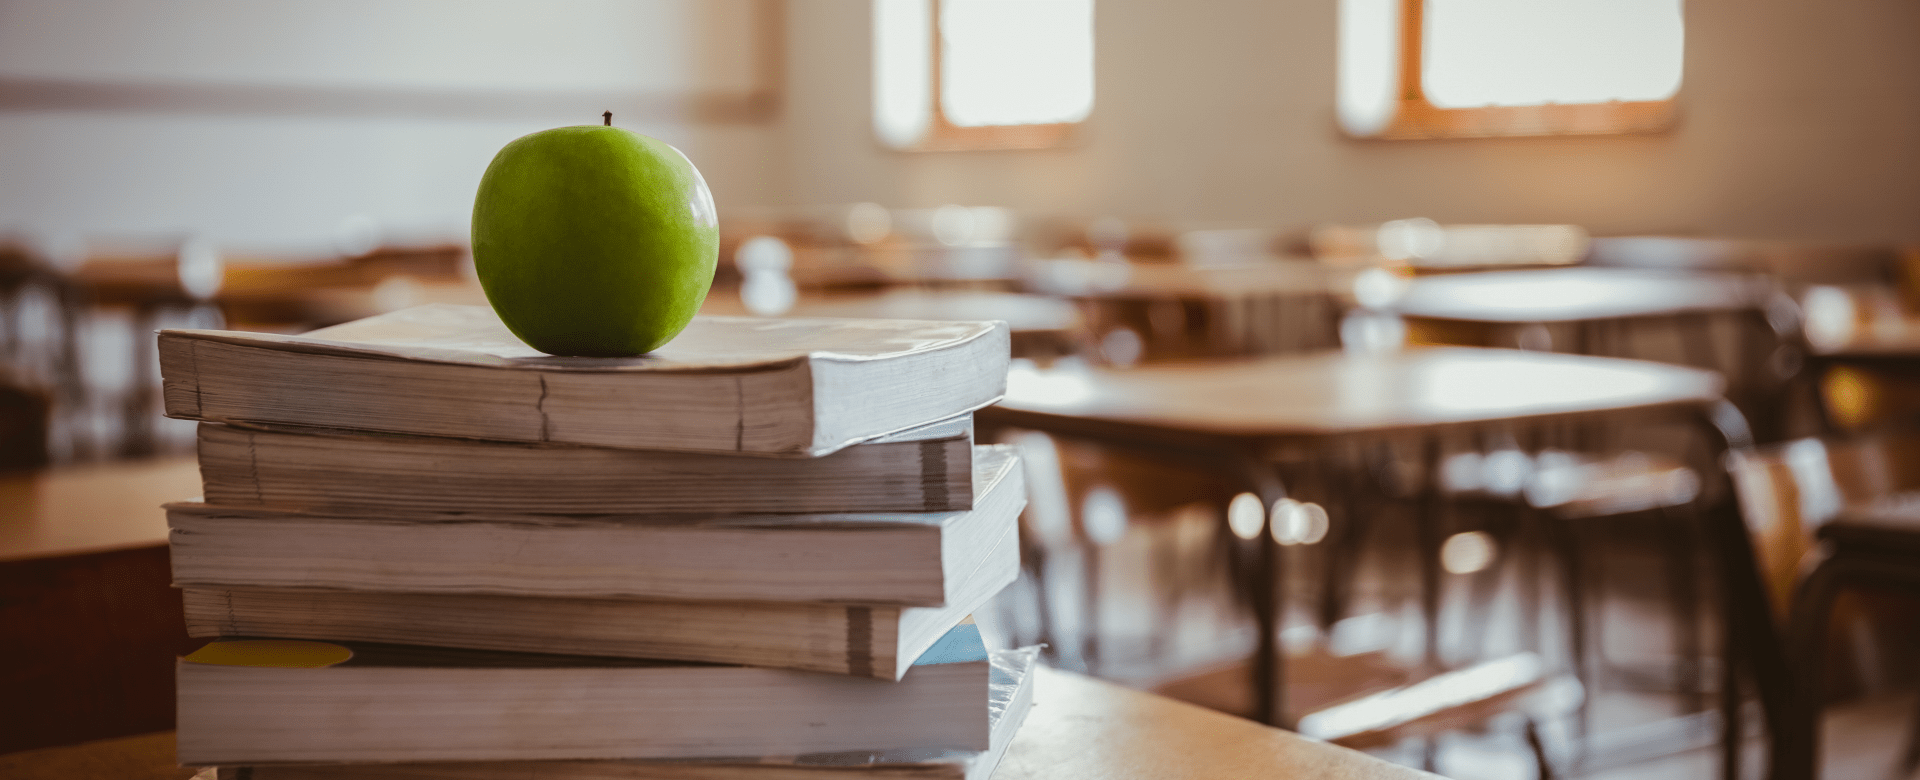 Green apple on top of a pile of books in an empty classroom